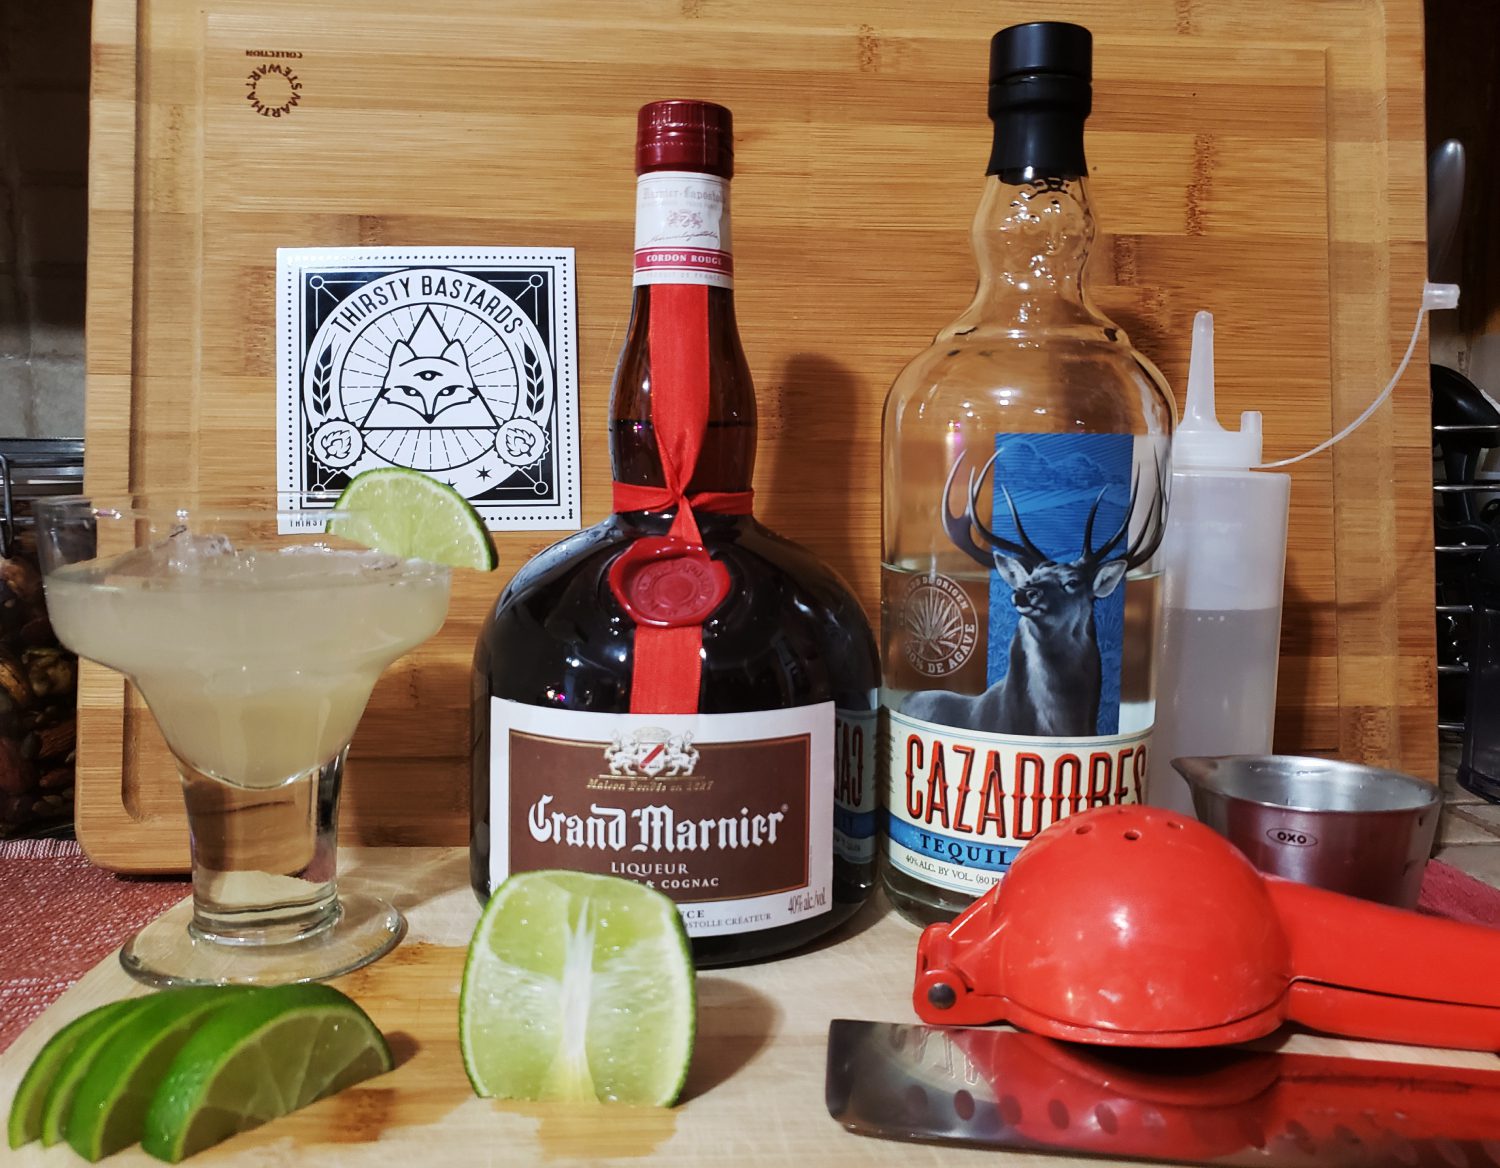 Margarita with Cazadores Blanco & Grand Marnier served on the rocks